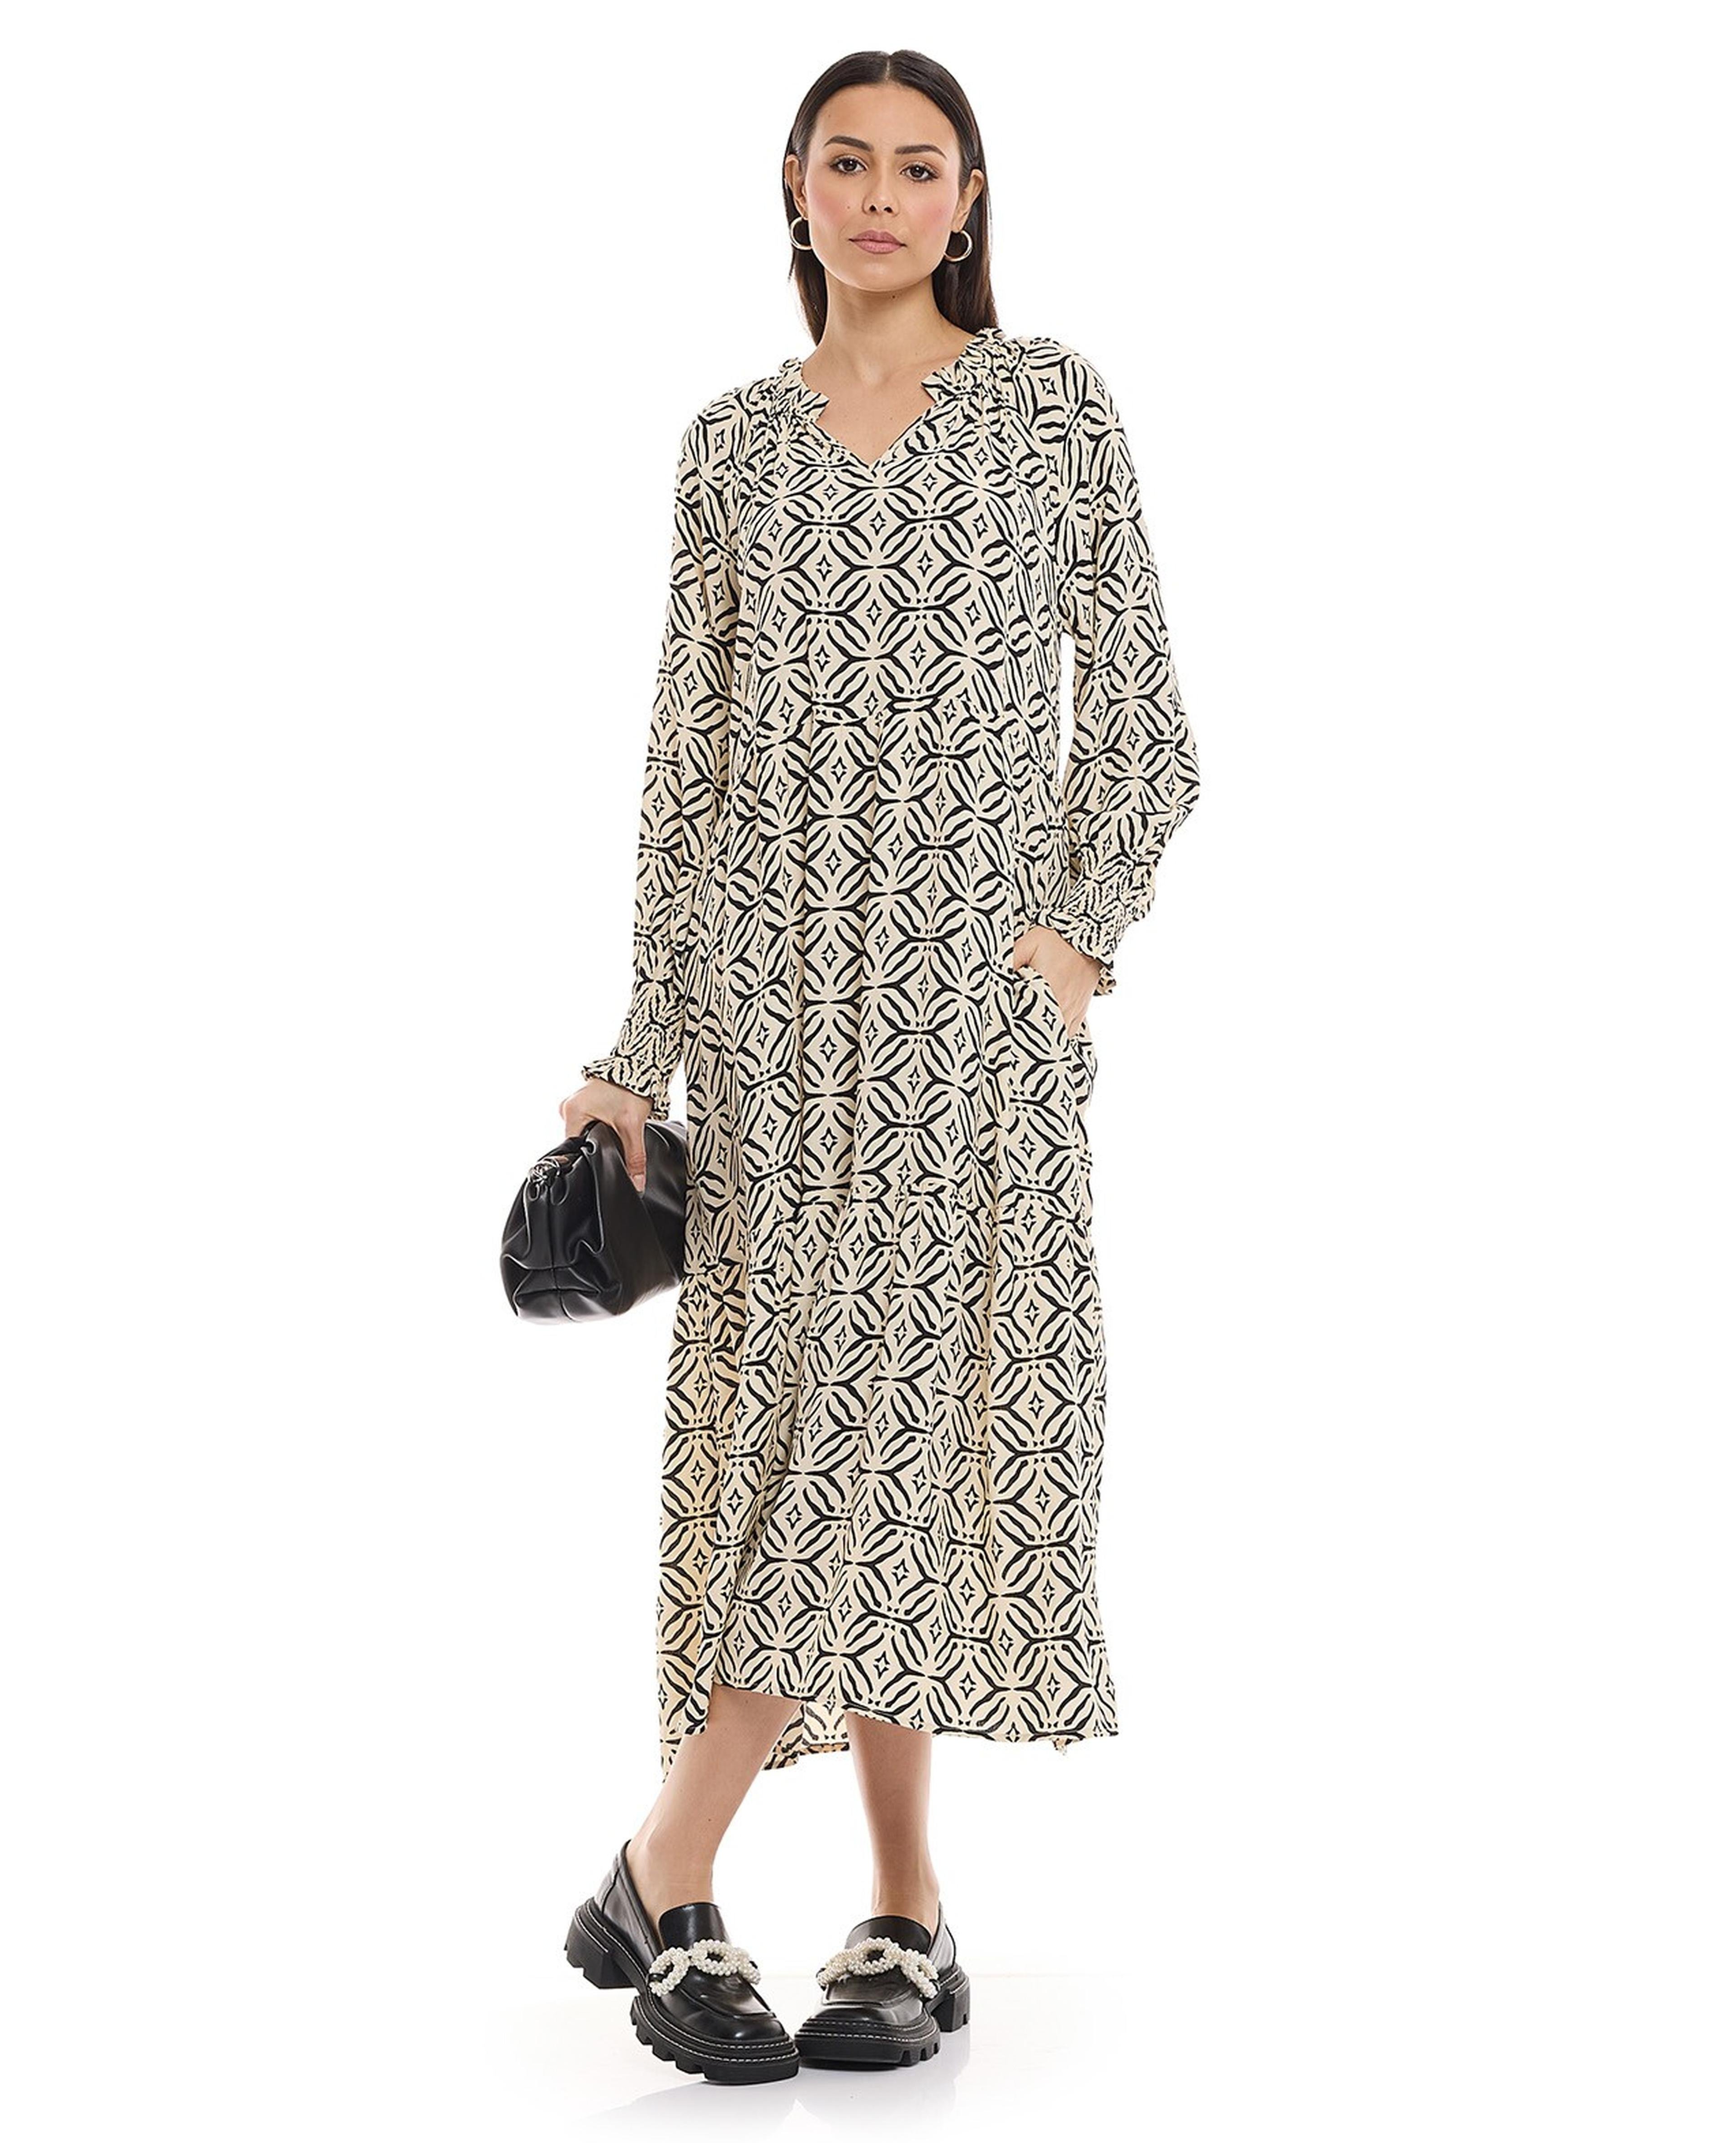 Patterned A-Line Dress with V-Neck and Puff Sleeves